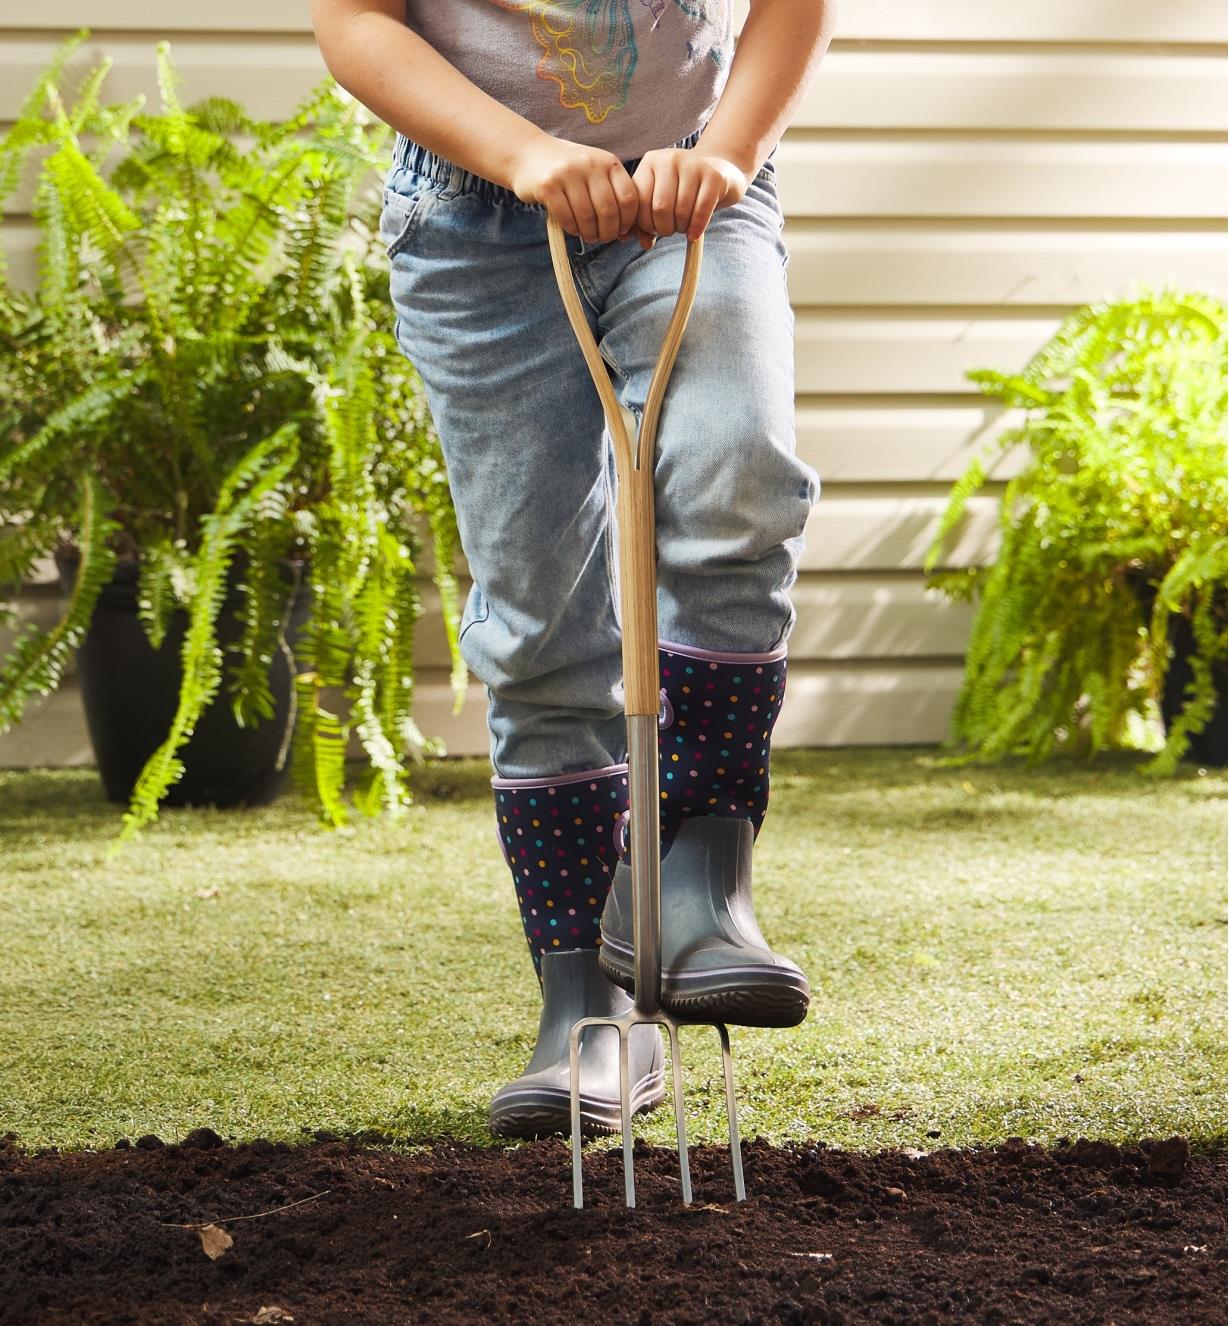 A child wearing rubber boots holds the children’s digging fork and pushes it into soil with one foot